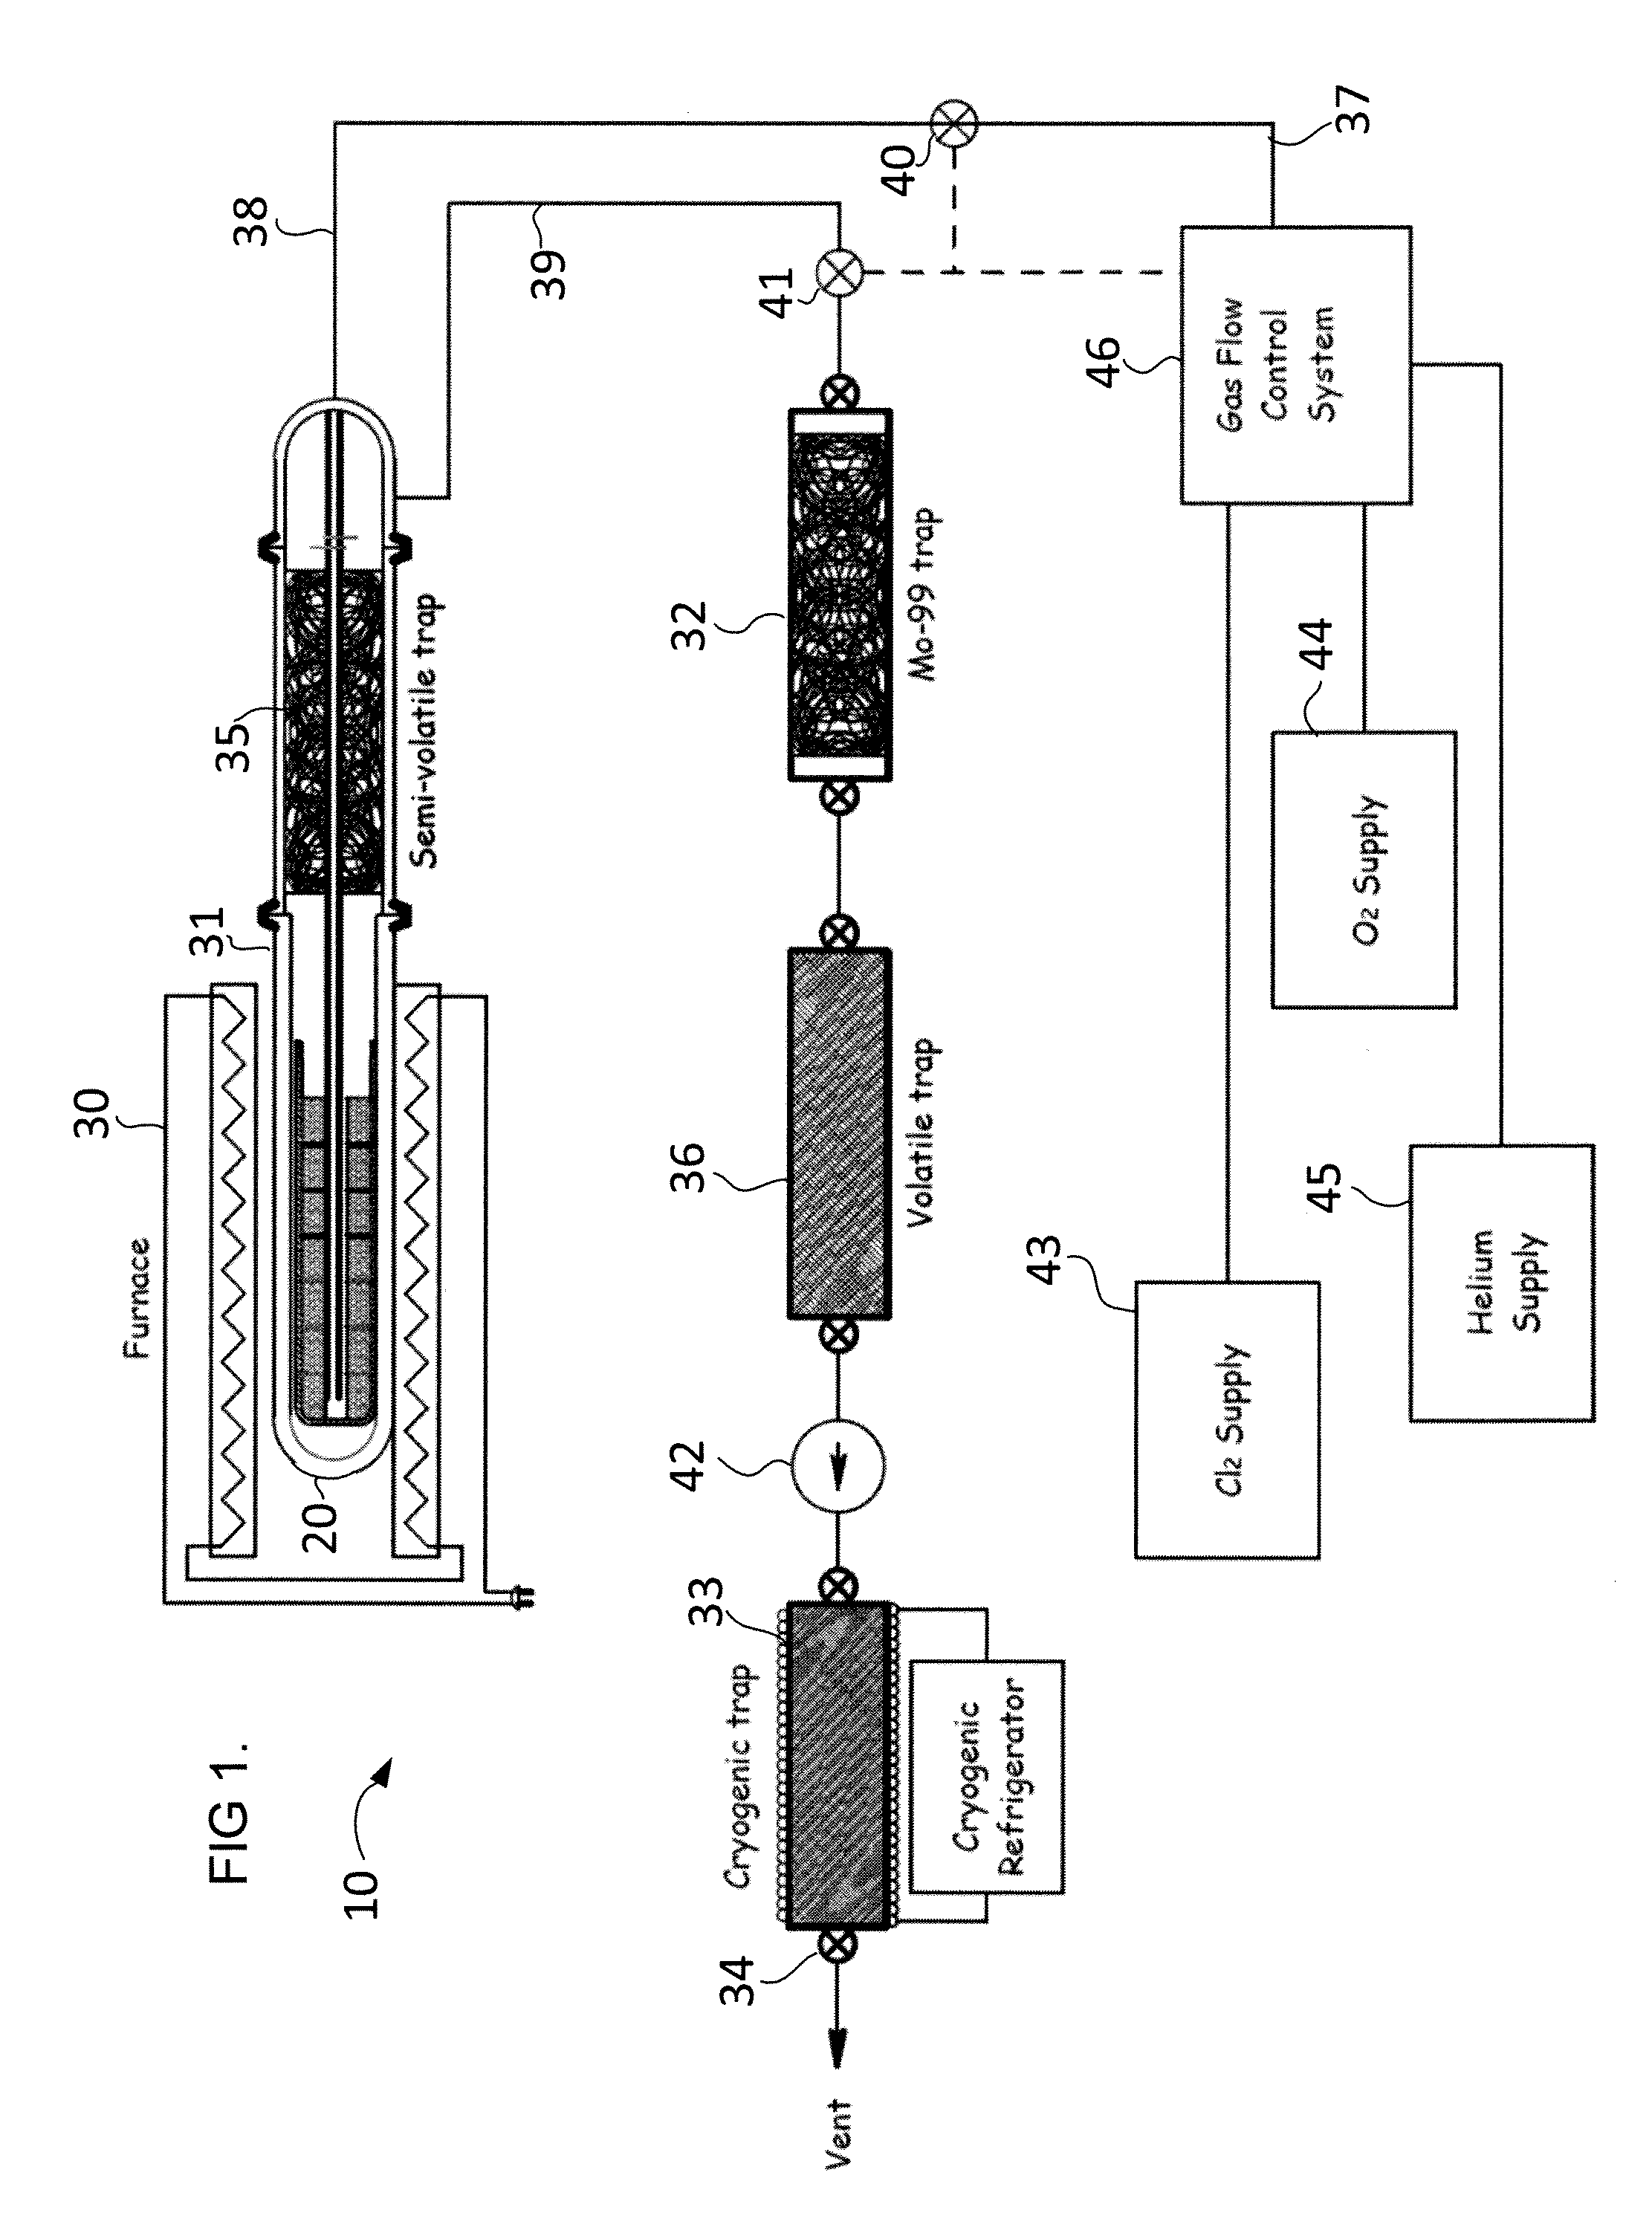 Methods and apparatus for selective gaseous extraction of molybdenum-99 and other fission product radioisotopes